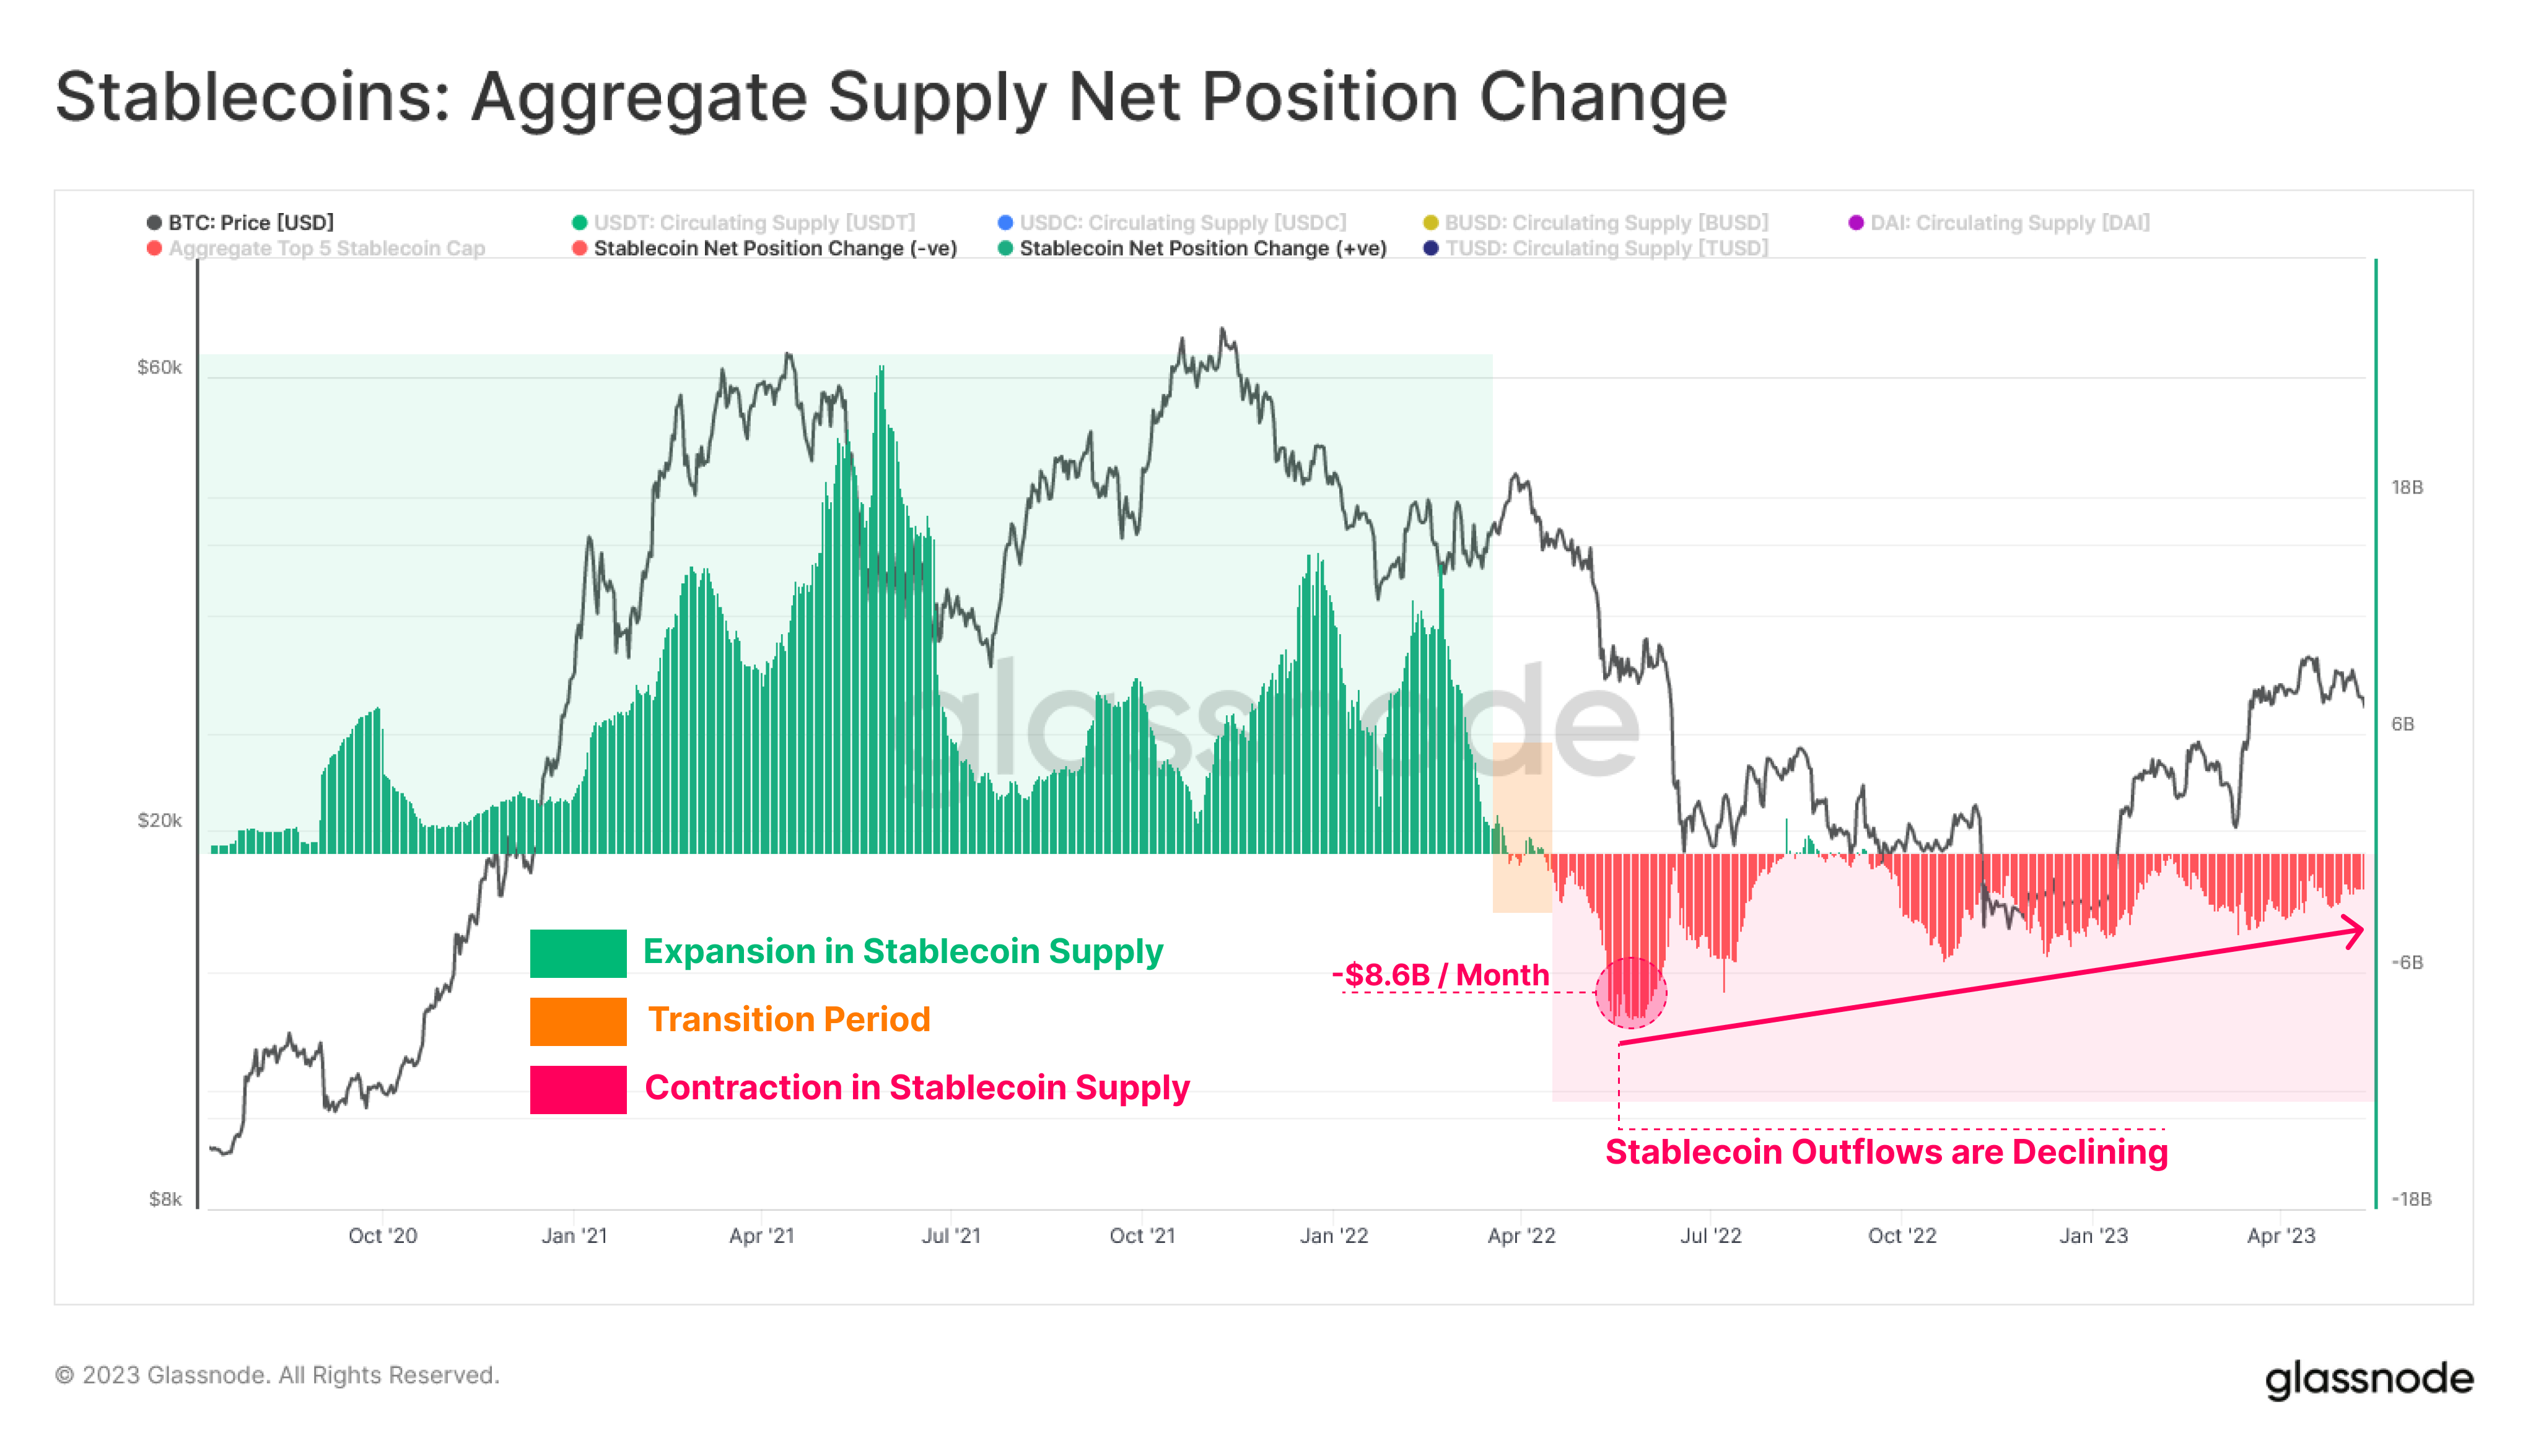 Stablecoins: Aggregate Supply Net Position Change